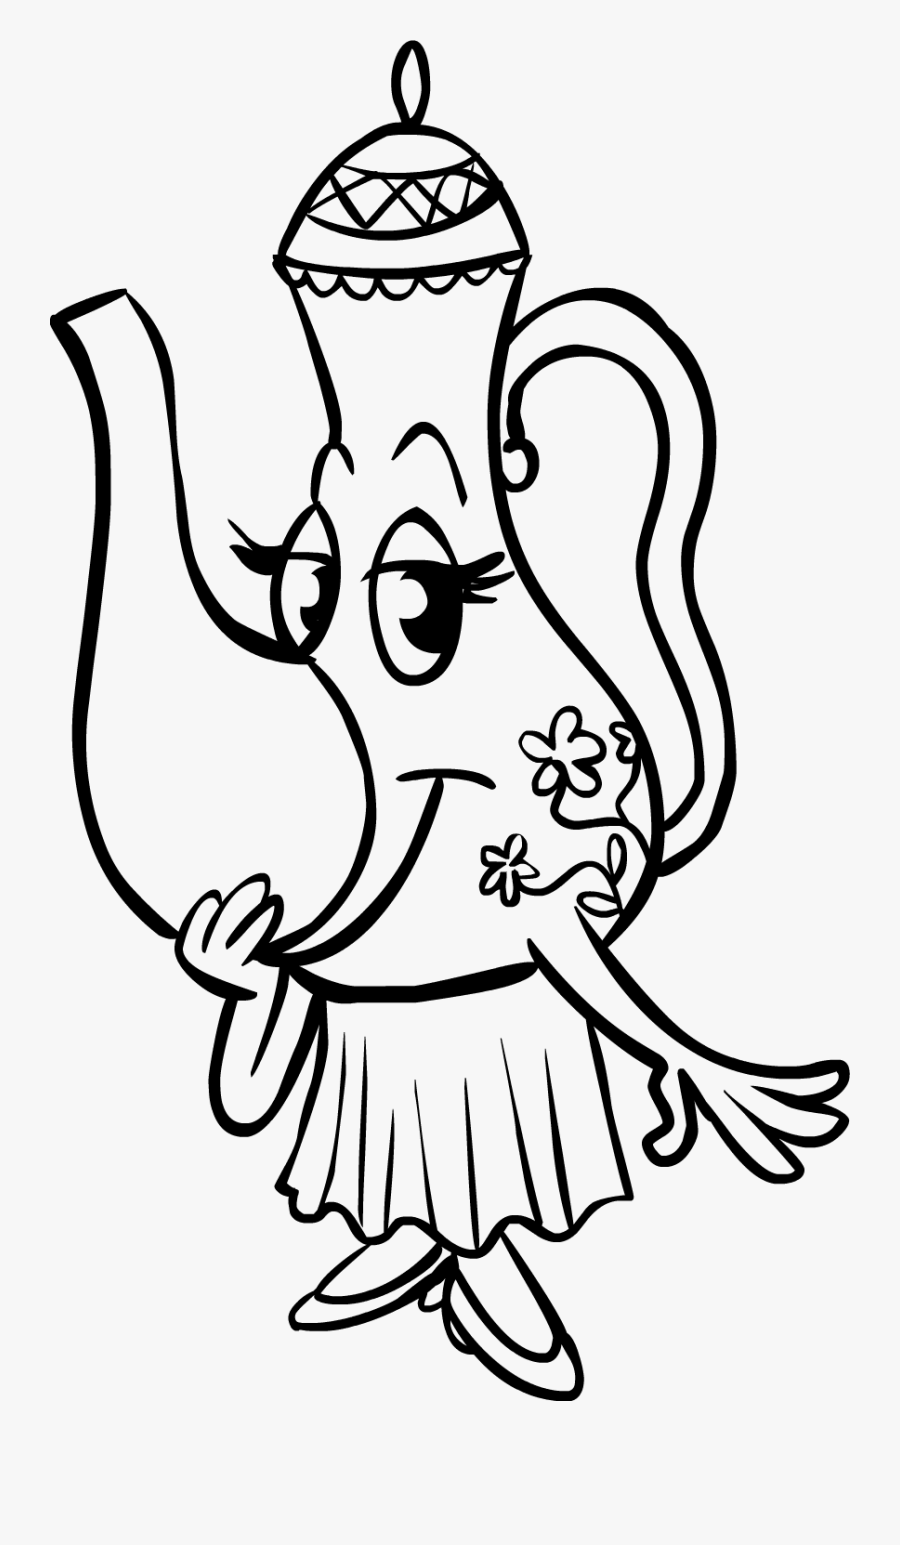 Funny Teapot Coloring Pages, Transparent Clipart